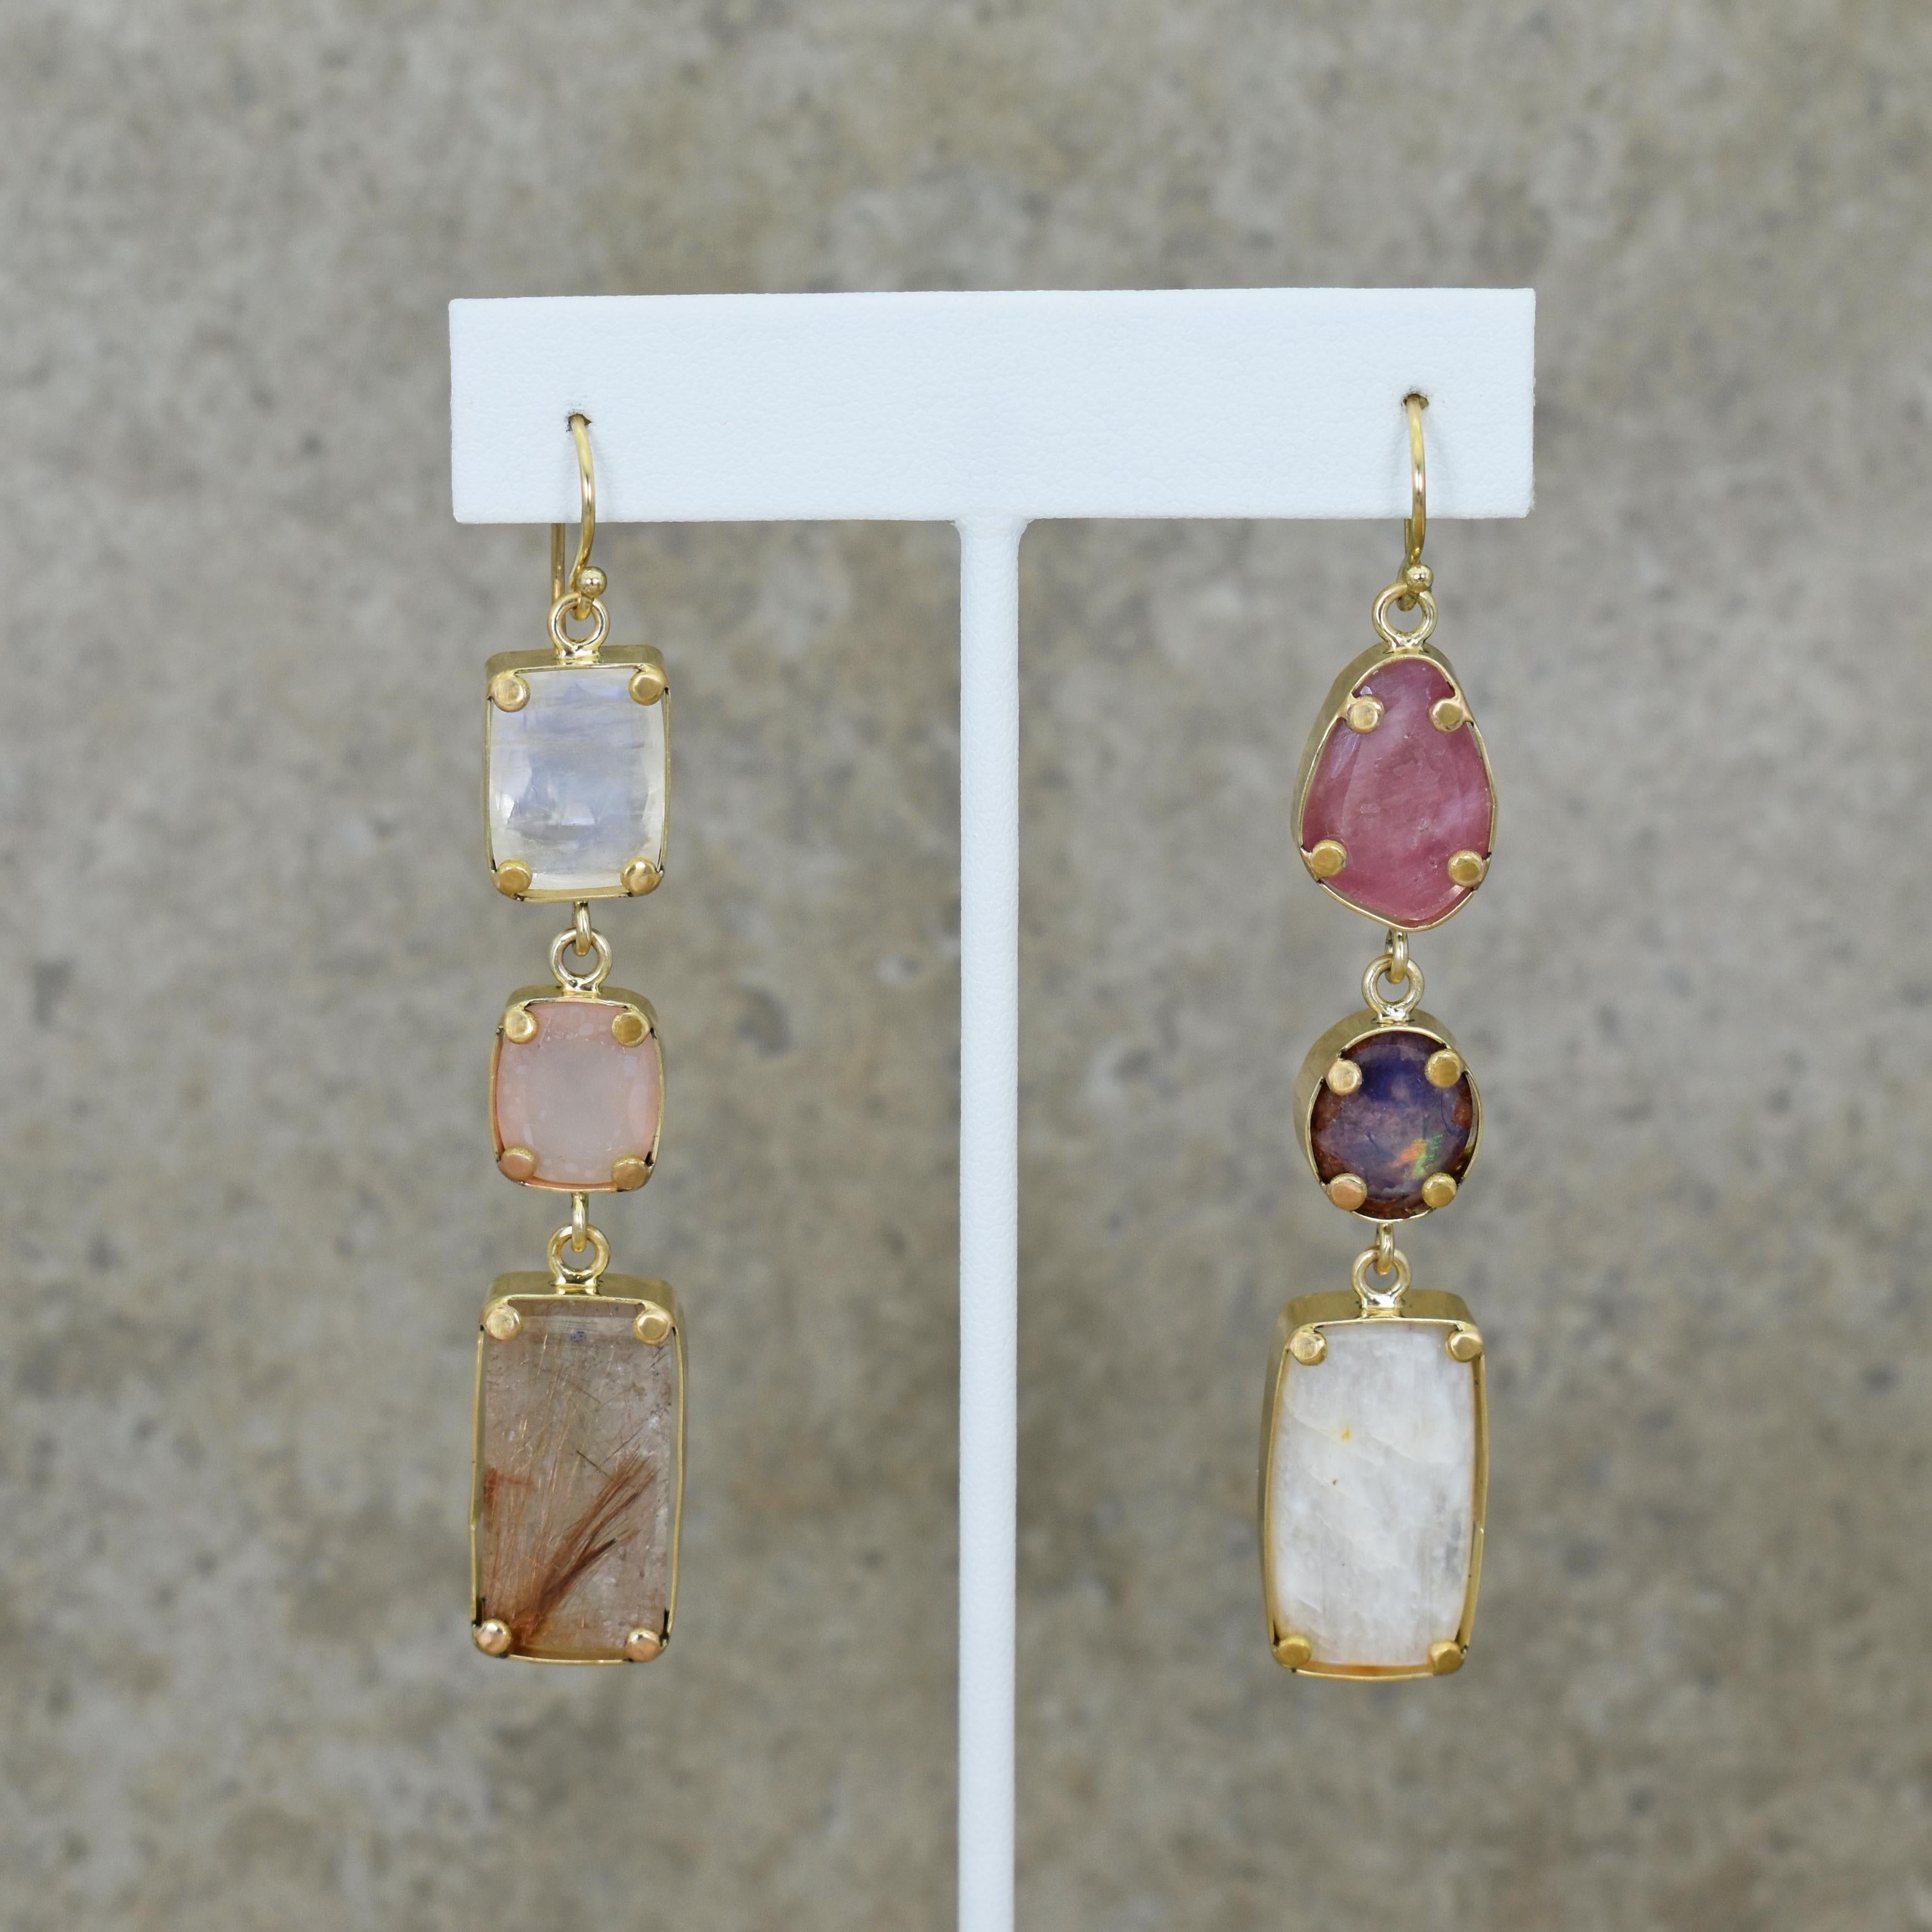 Contemporary 18k yellow gold asymmetrical dangle earrings featuring faceted Moonstone, Pink Chalcedony, Rutilated Quartz, Pink Tourmaline, Mexican Fire Opal and a Russian Moonstone cabochon. Dangle earrings are 3.13 inches in length. Gorgeous and